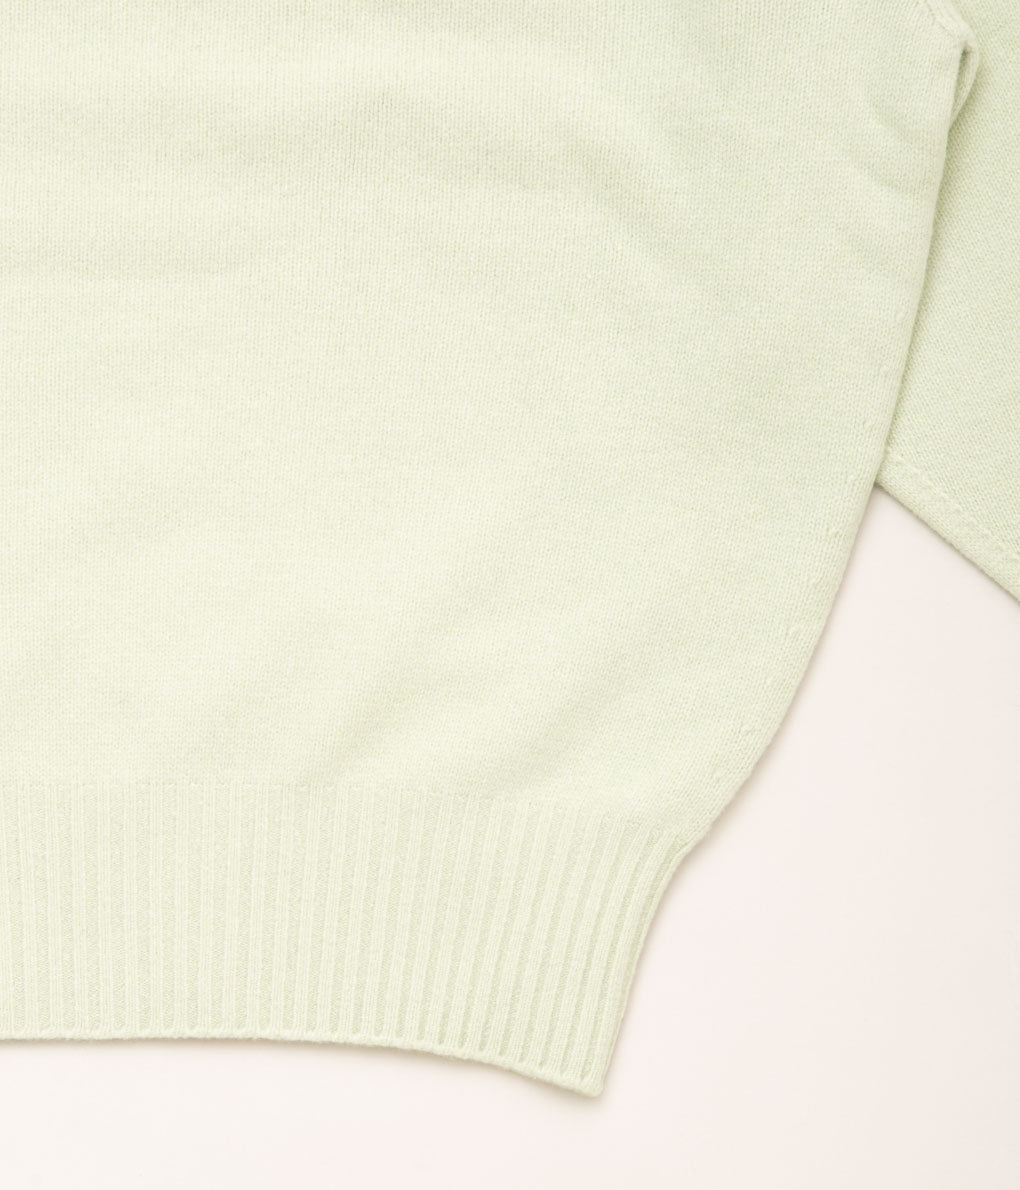 POSTELEGANT "FINE WOOL PULL-OVER KNIT"(PALE GREEN)